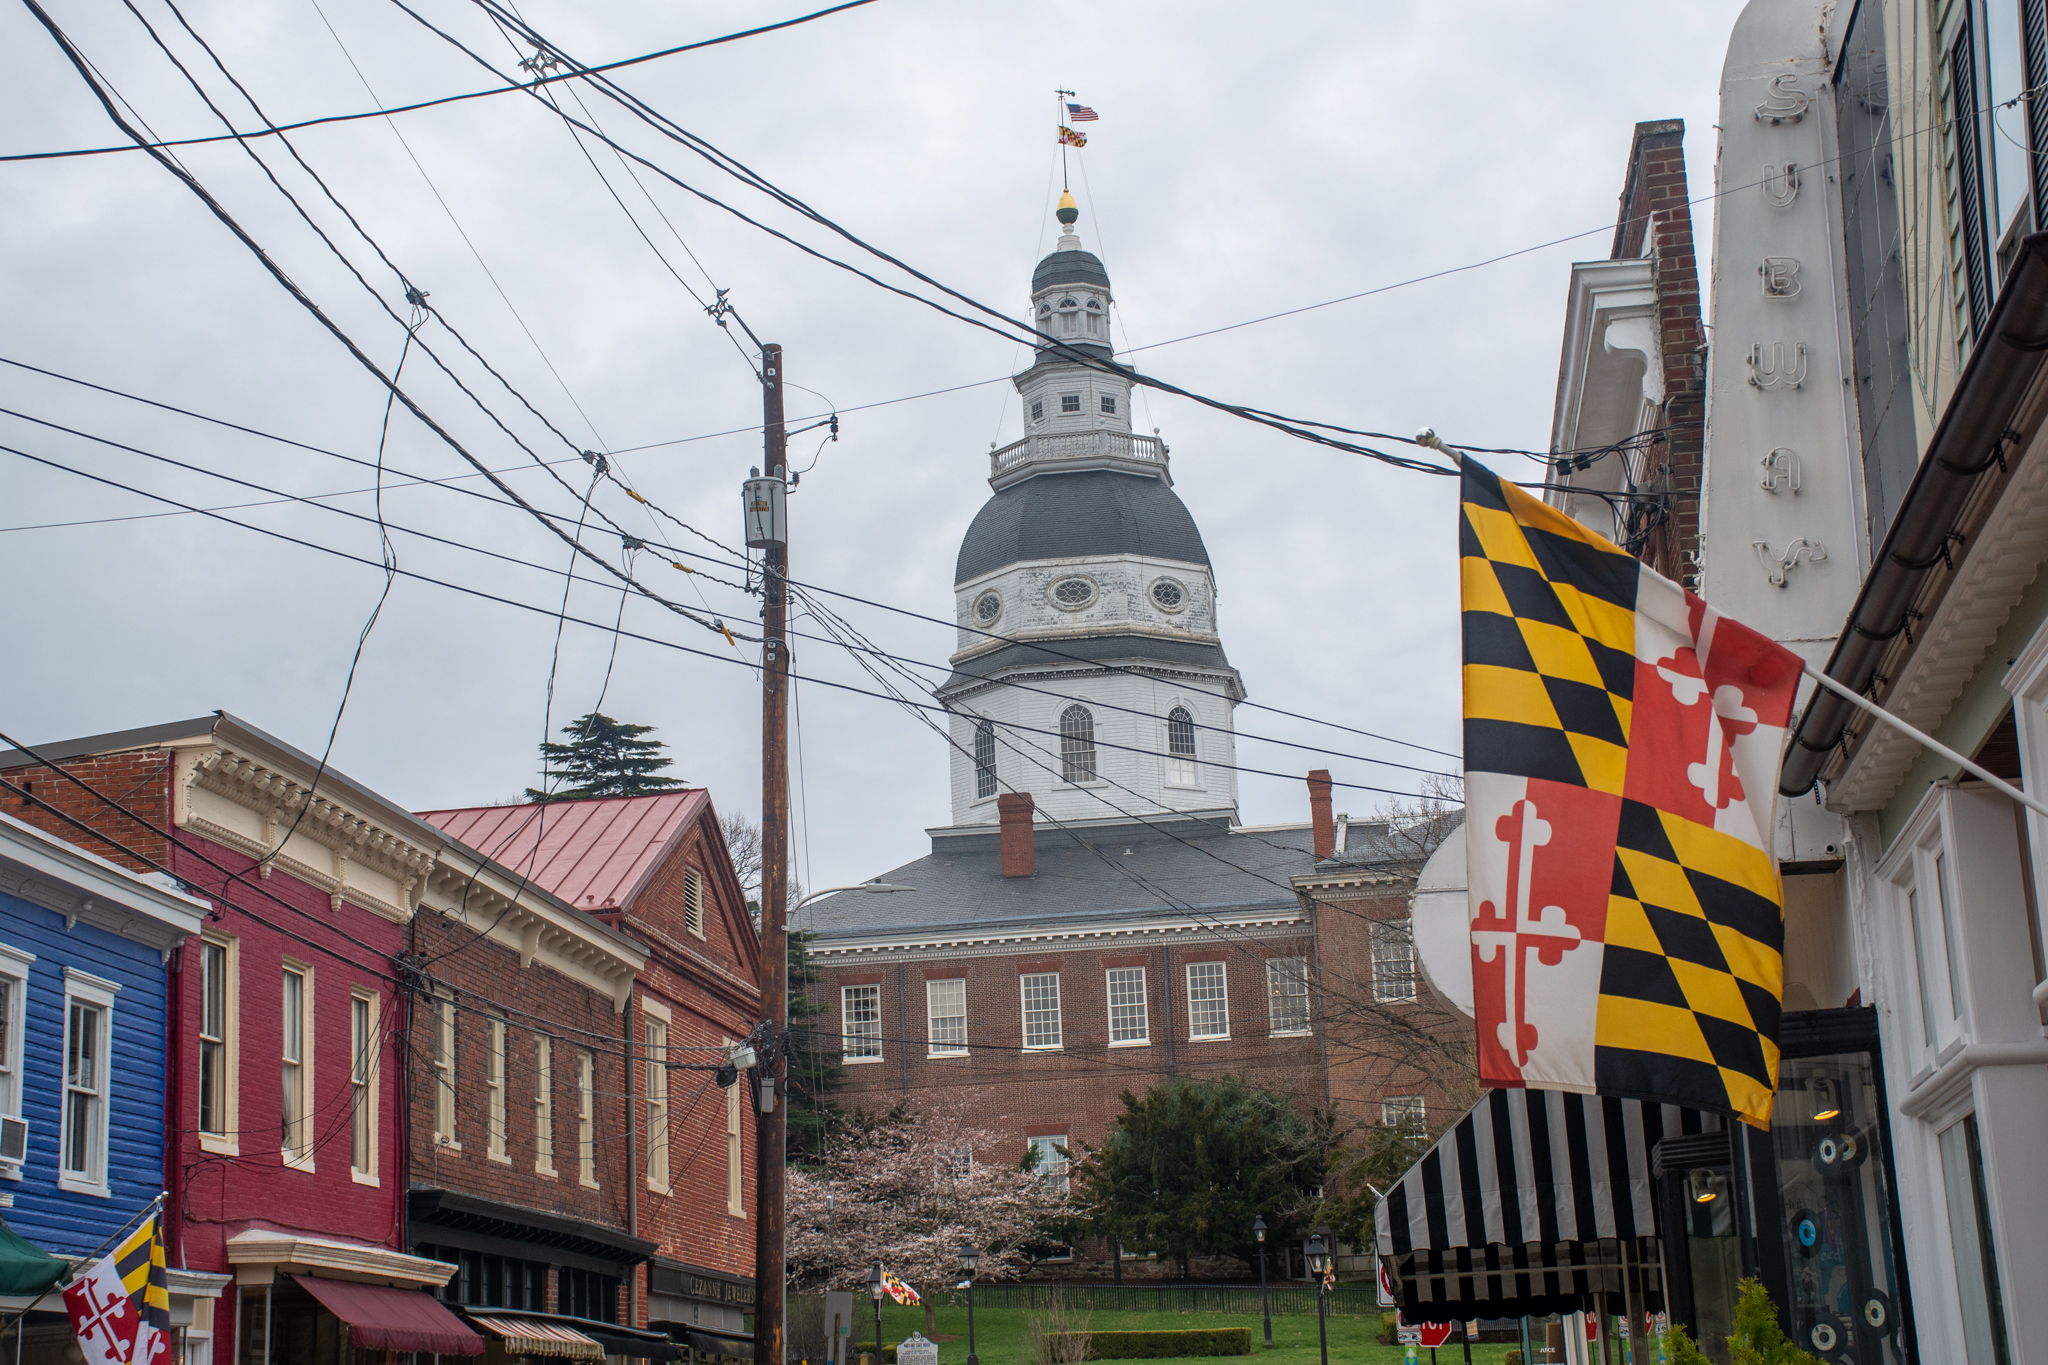 The Maryland State House on March 23, 2022. (Christine Zhu/Capital News Service)